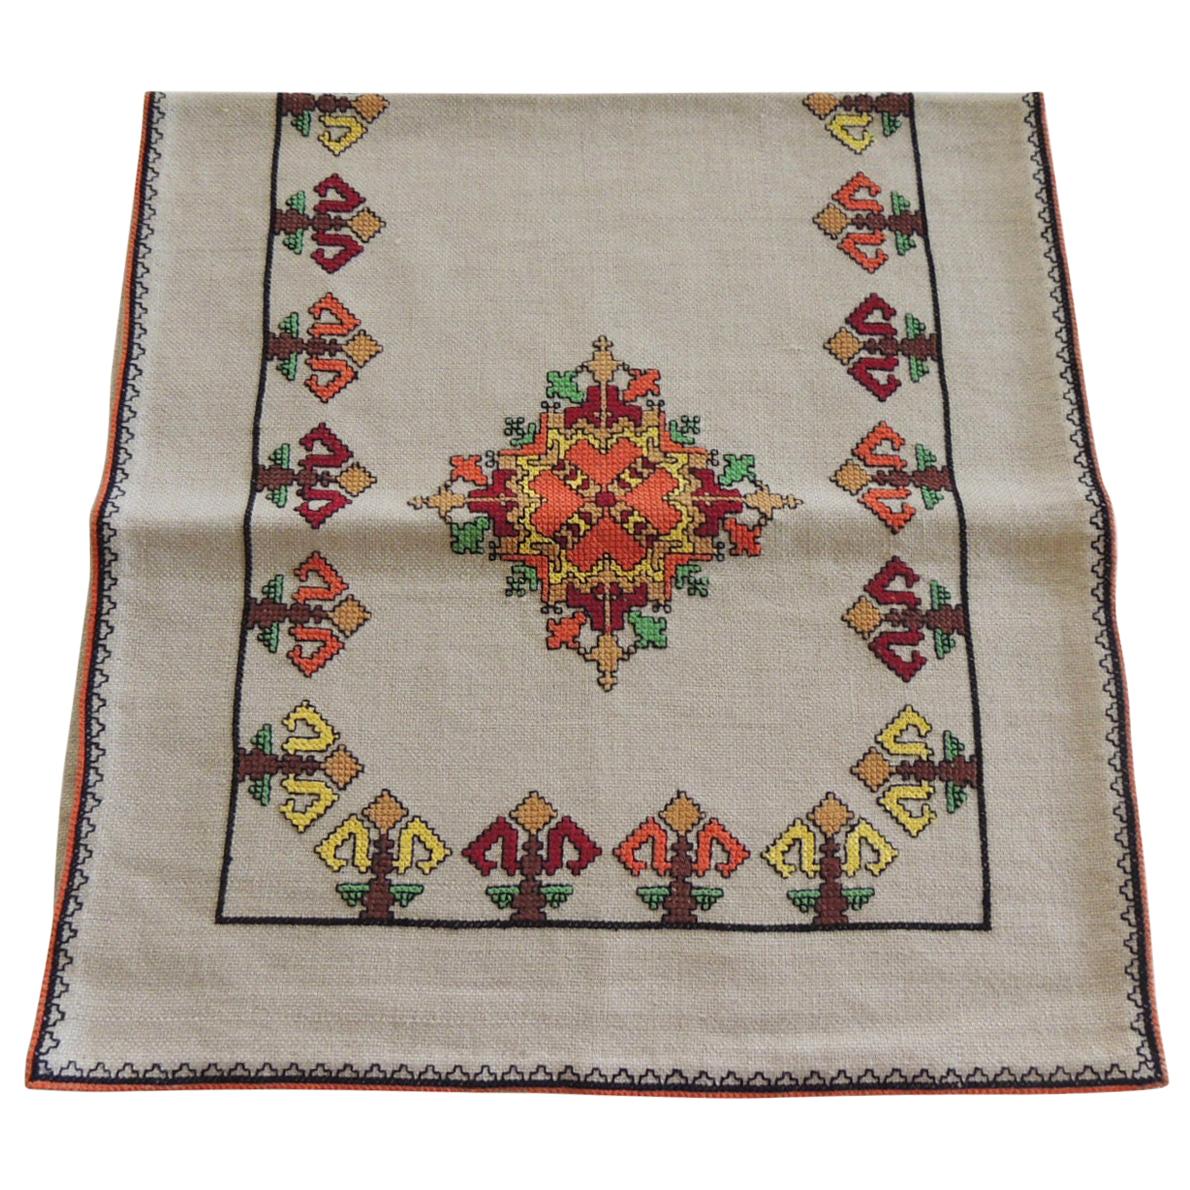 Vintage Colorful Embroidered Table Runner Textile